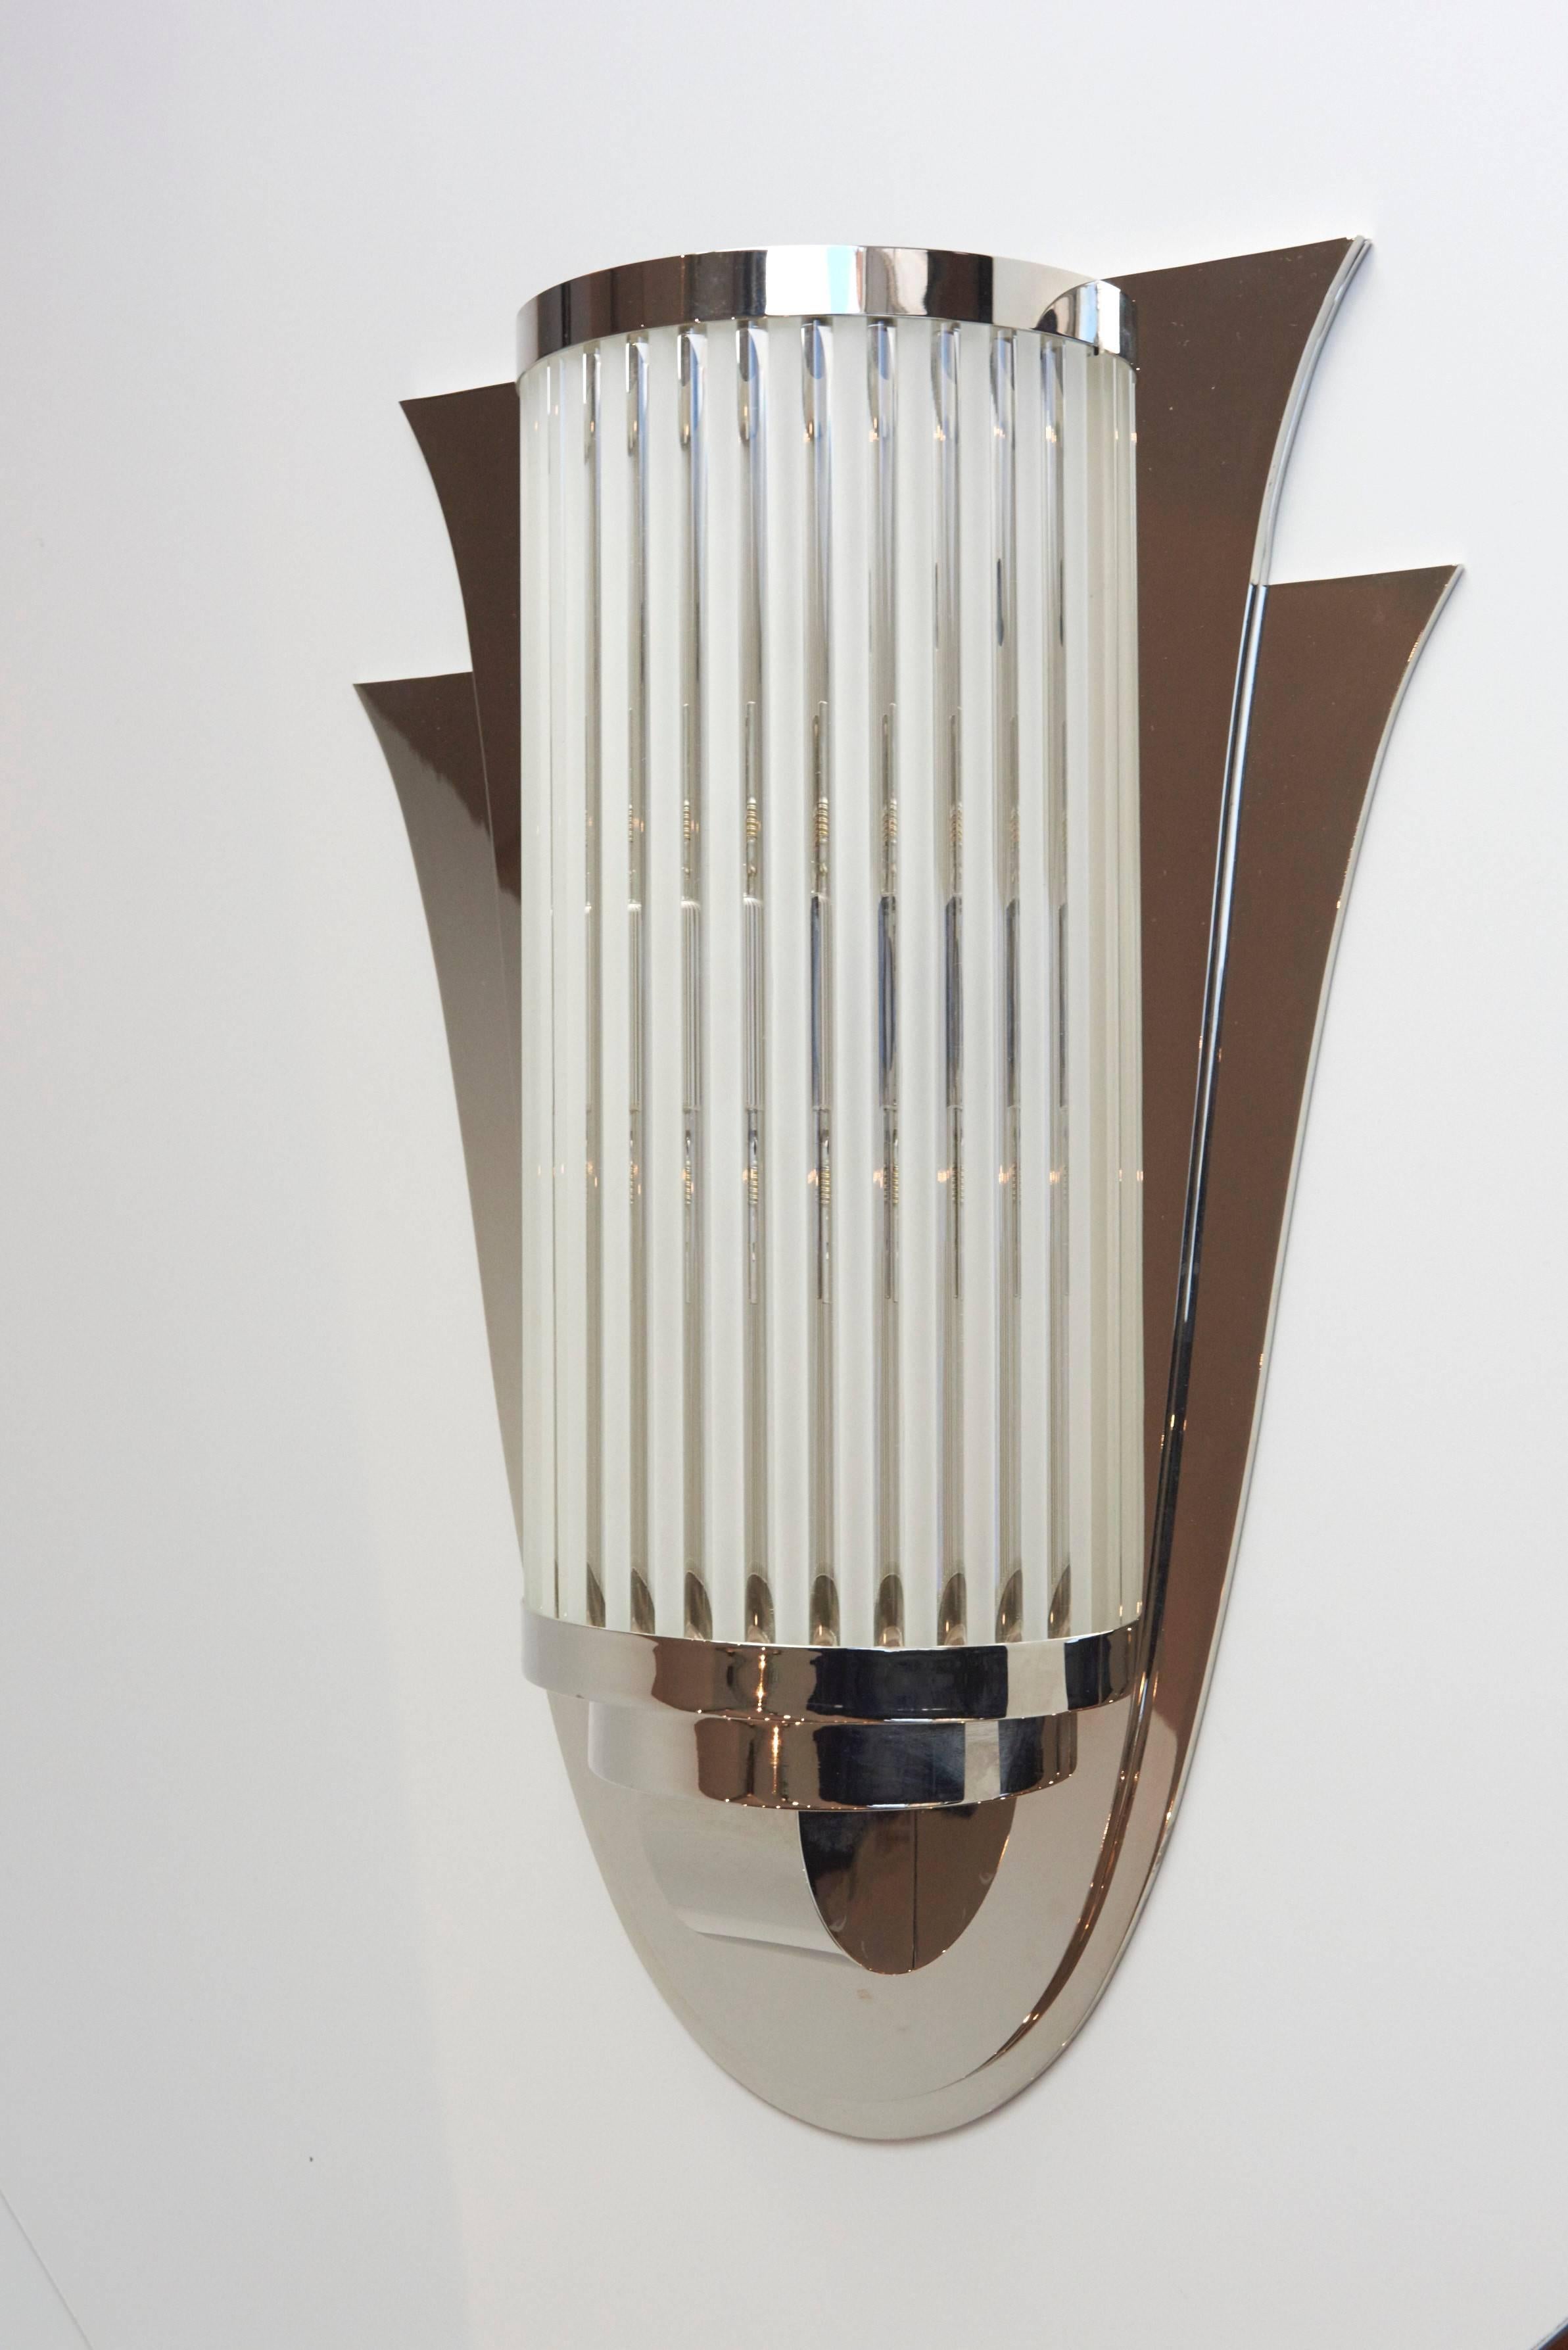 An exceptional pair of tulip shaped wall lights, made in nickel-plated metal frame and glass rods. The lamps are designed in Art-deco style, a typical modernist design. Very elegant. Two E14 glass bulbs.
There is possibility to order them for your